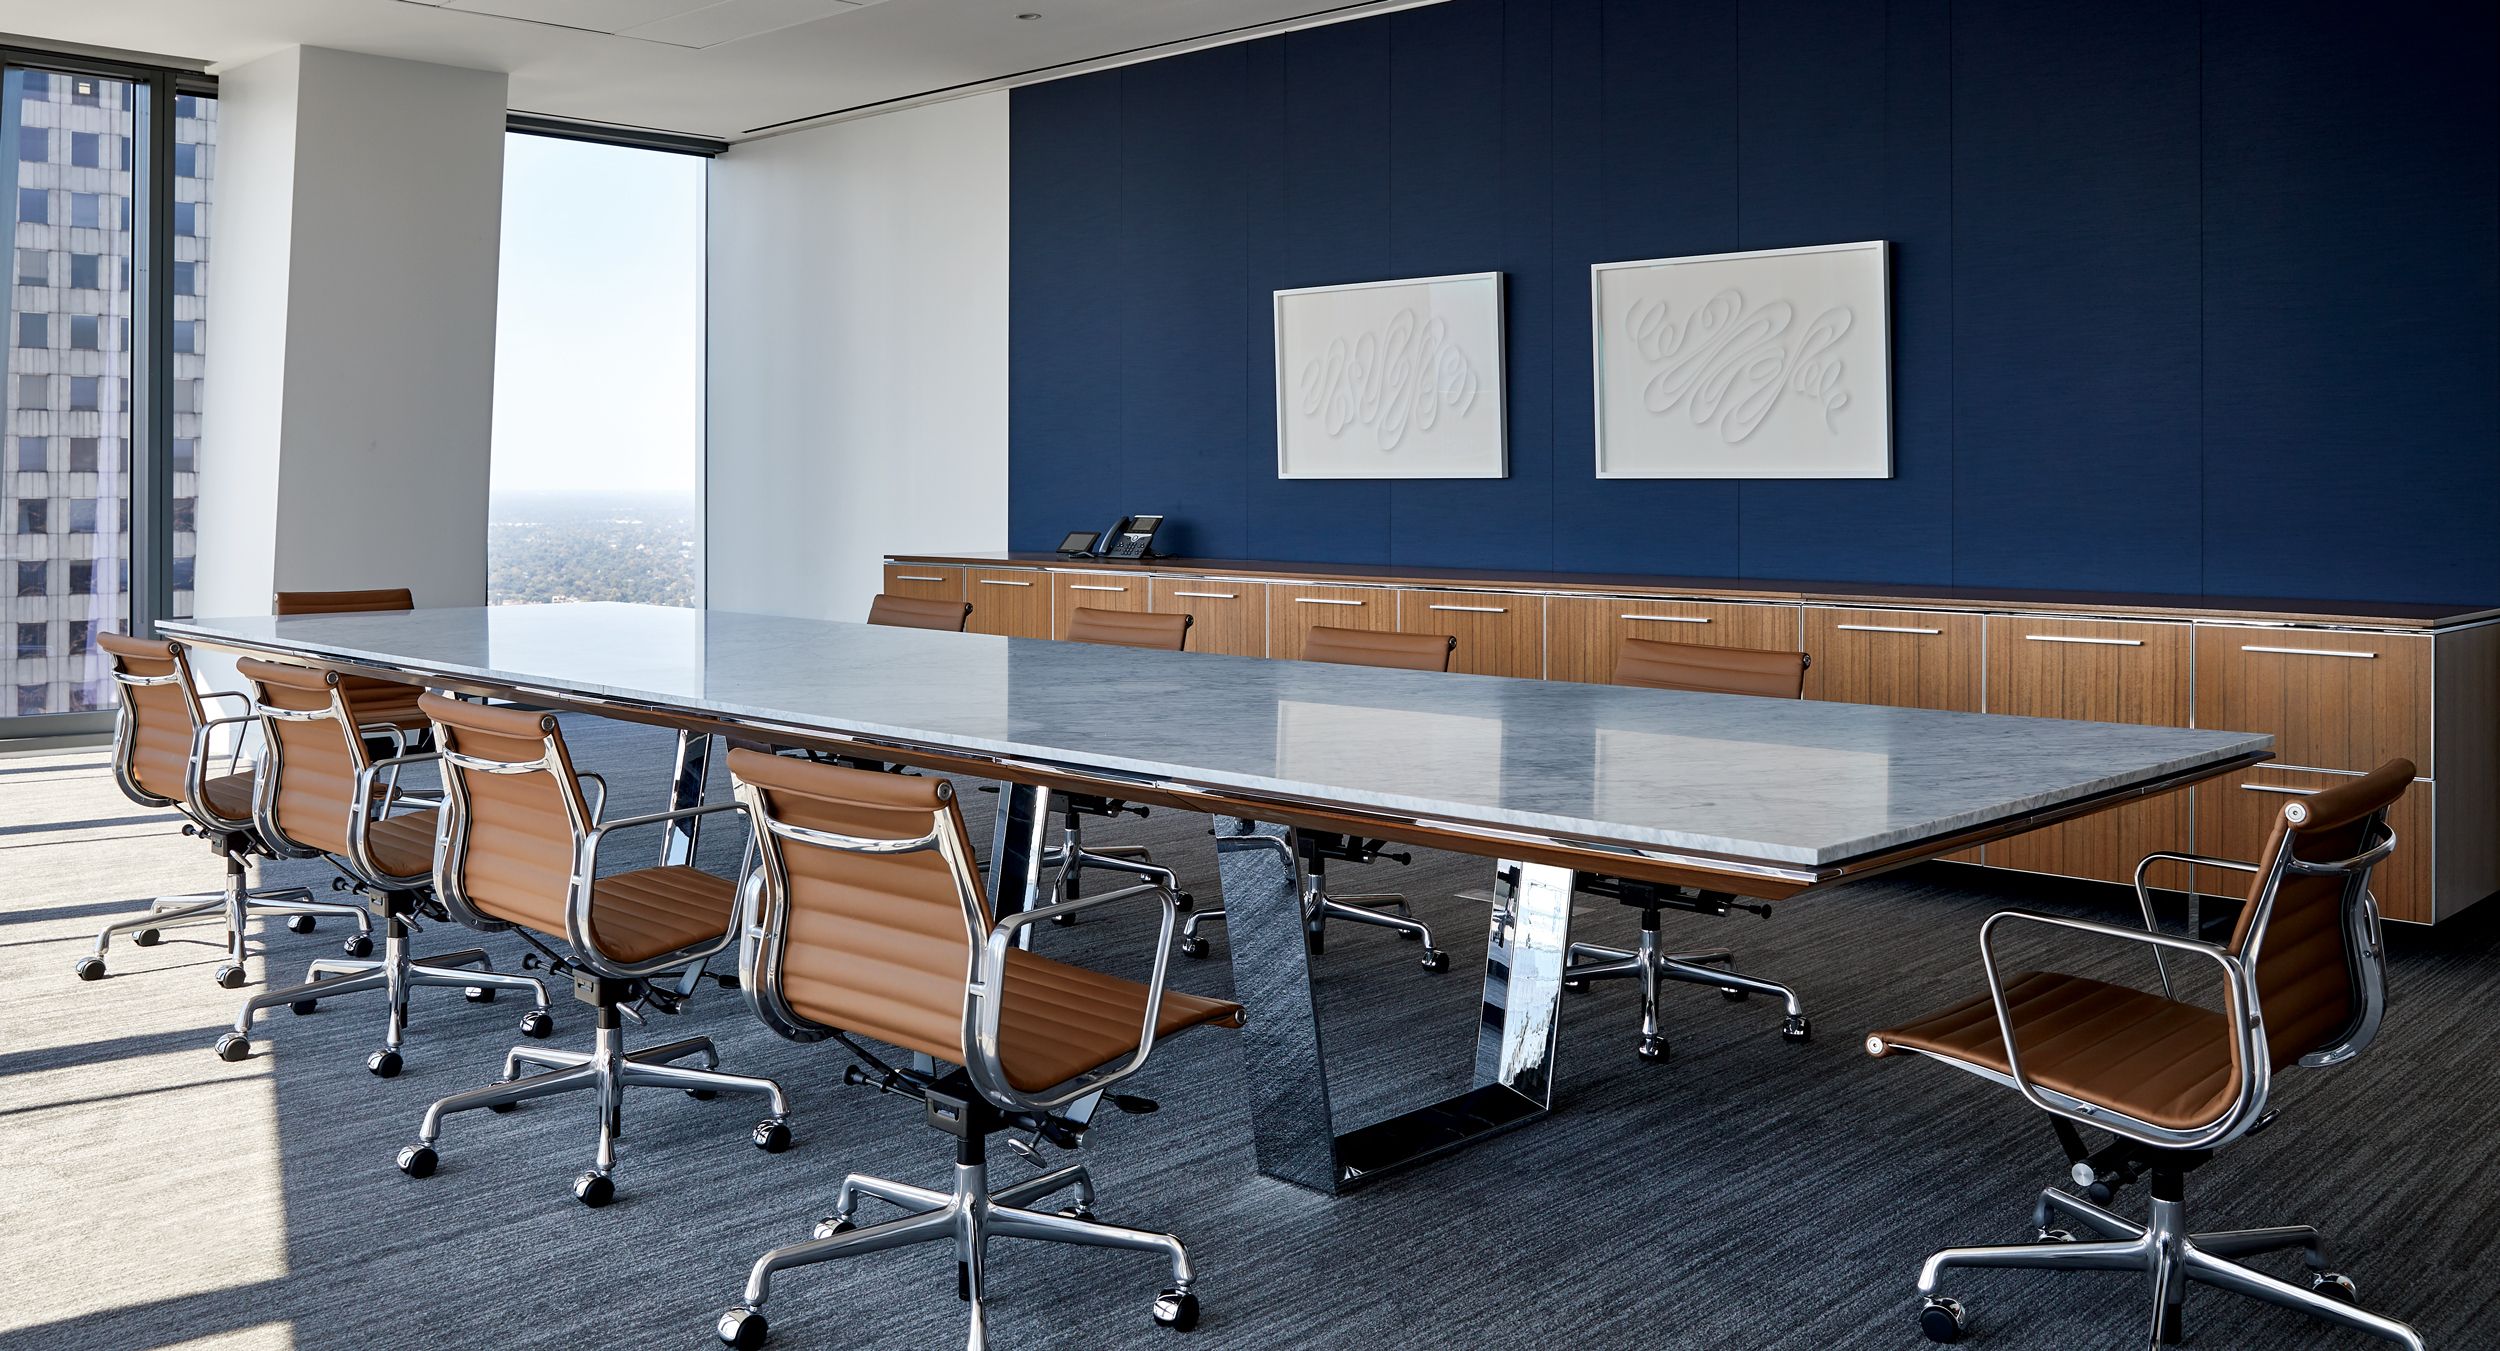 MESA pairs integrated technology with an uncompromising, award-winning design for the meeting spaces of today and tomorrow.